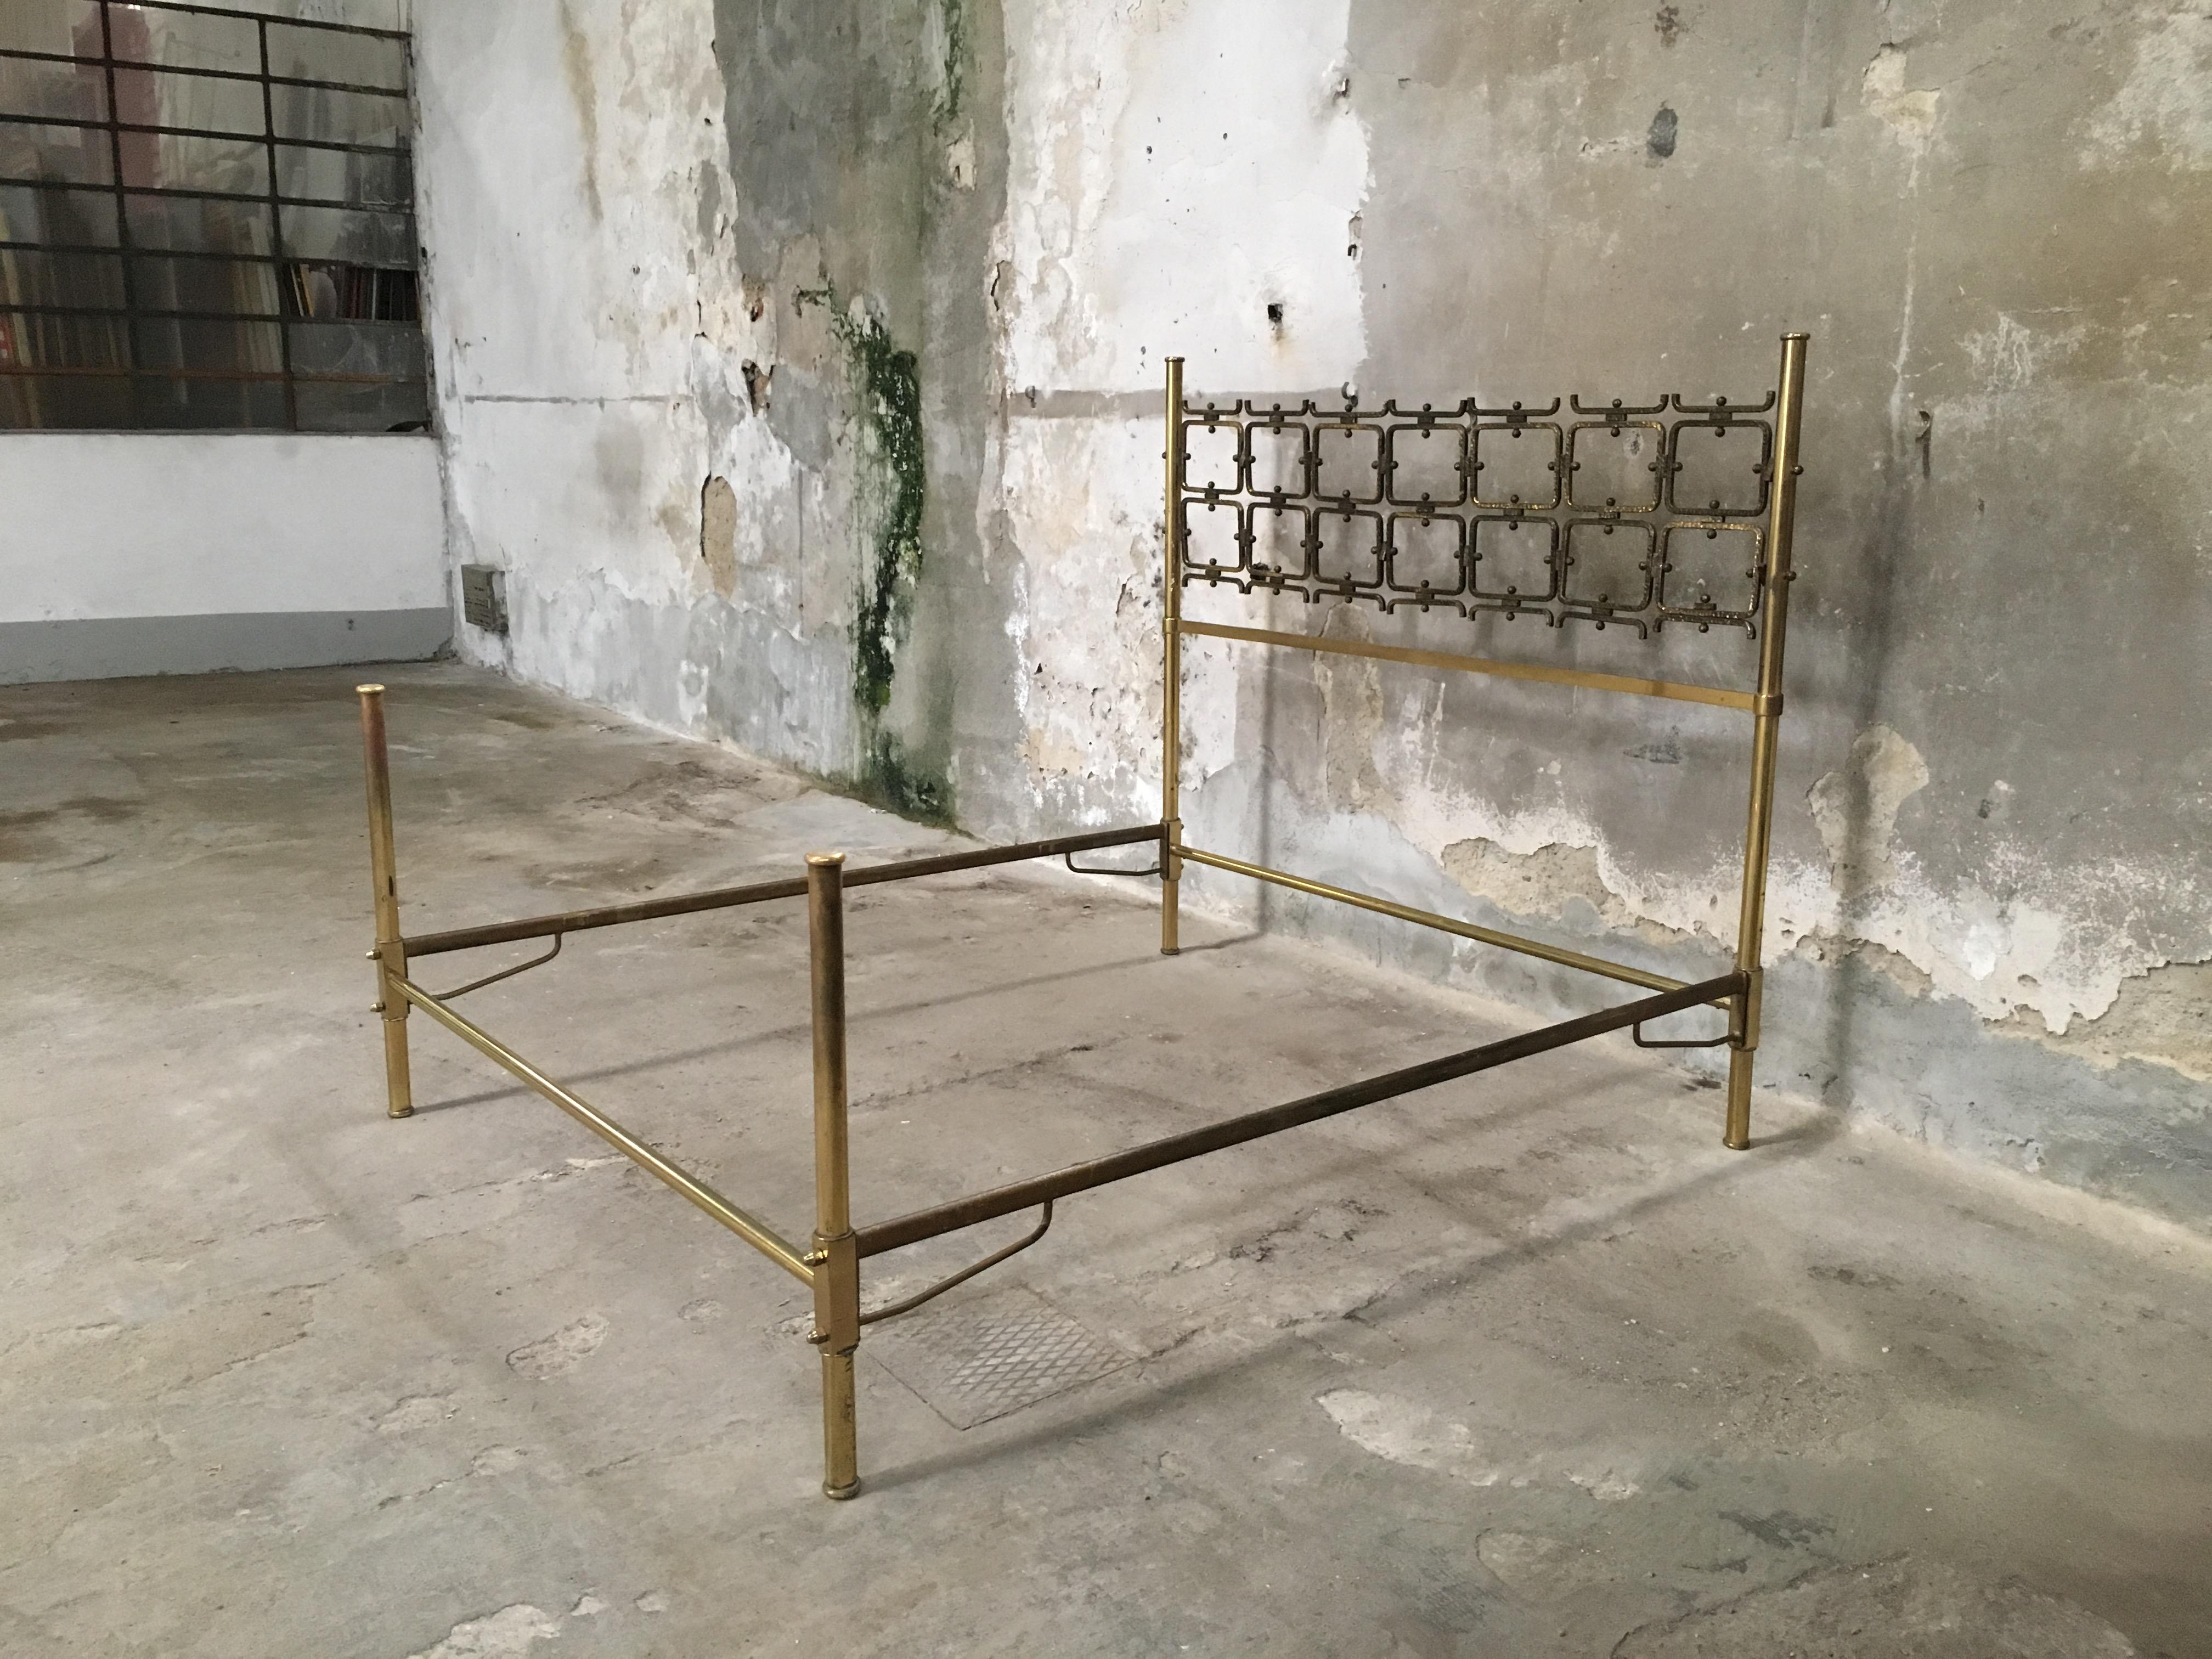 Mid-Century Modern Italian burnished brass double bed by Arnaldo Pomodoro and Osvaldo Borsani, 1960s.
The headboard is made of burnished brass and the remaining parts of the structure are in gilt brass. The bed needs a bed net and a mattress of